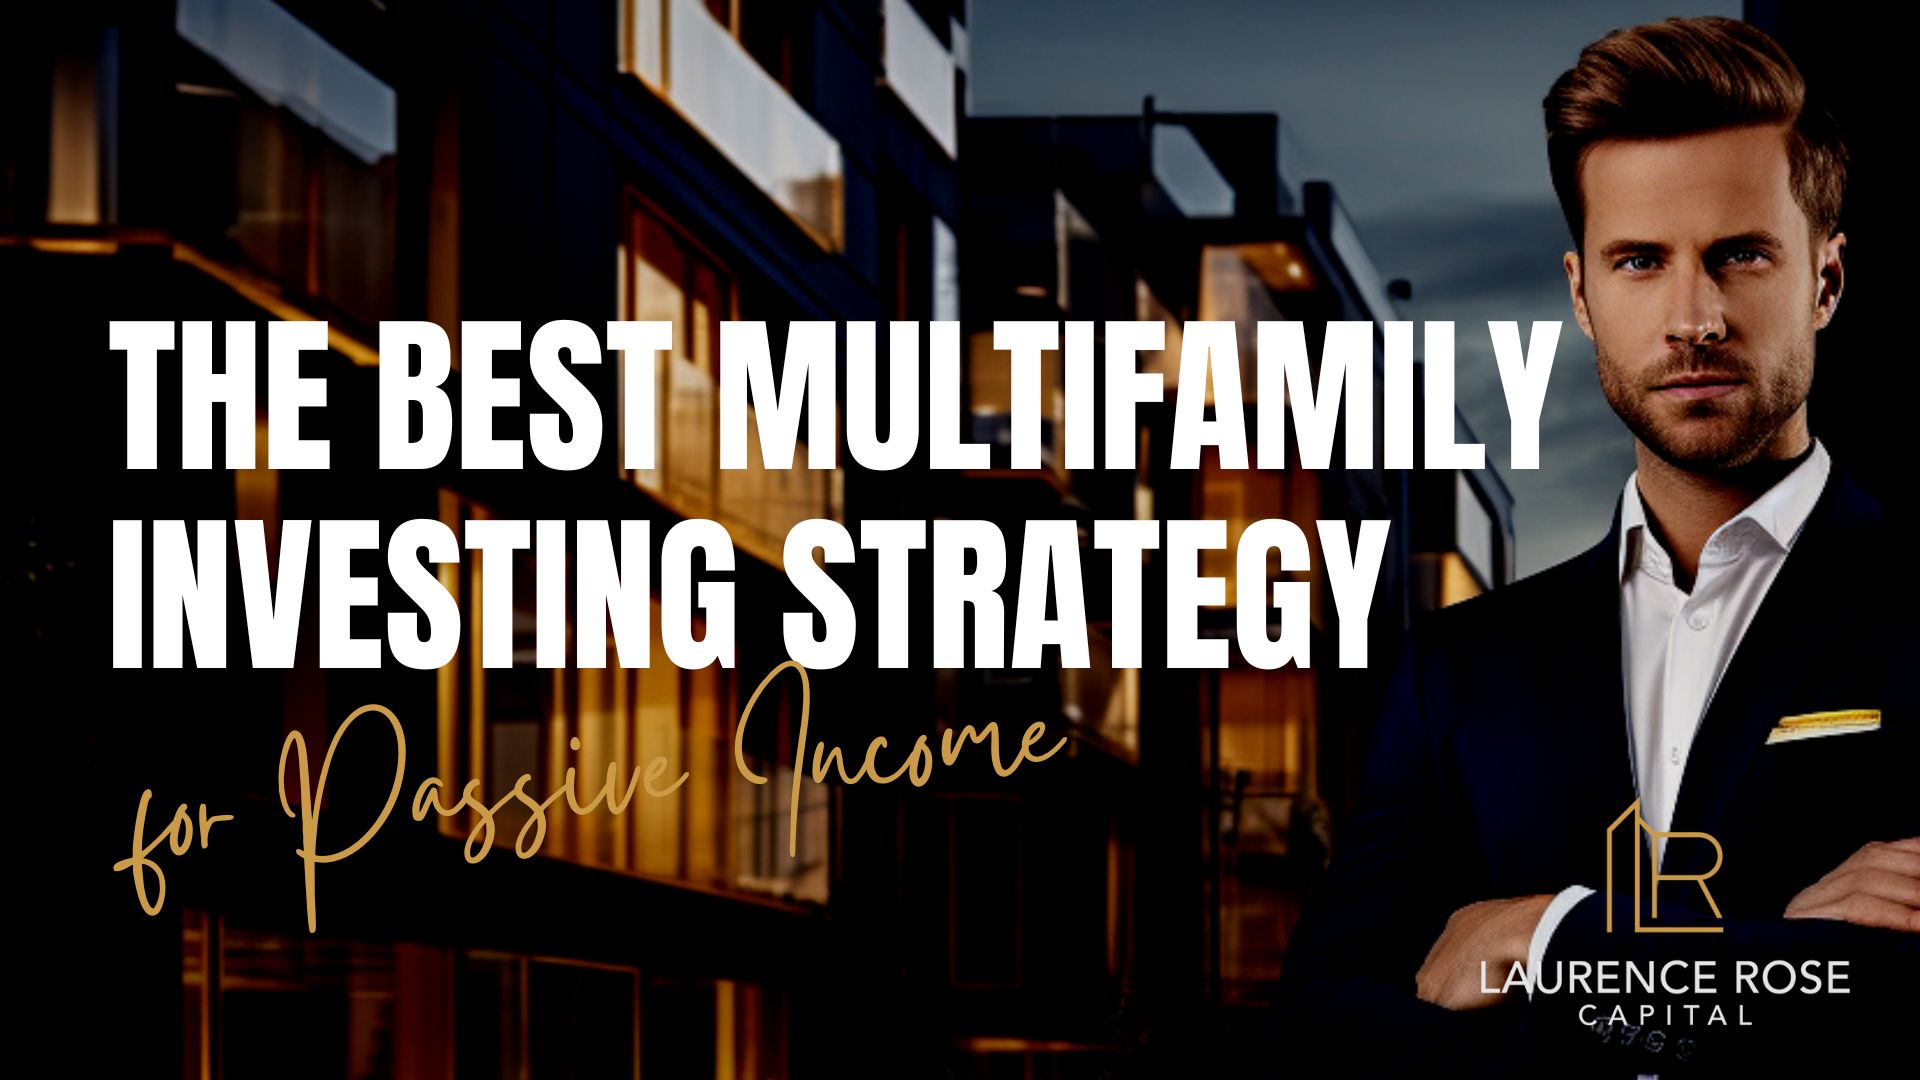 The Best Multifamily Investing Strategy for Passive Income